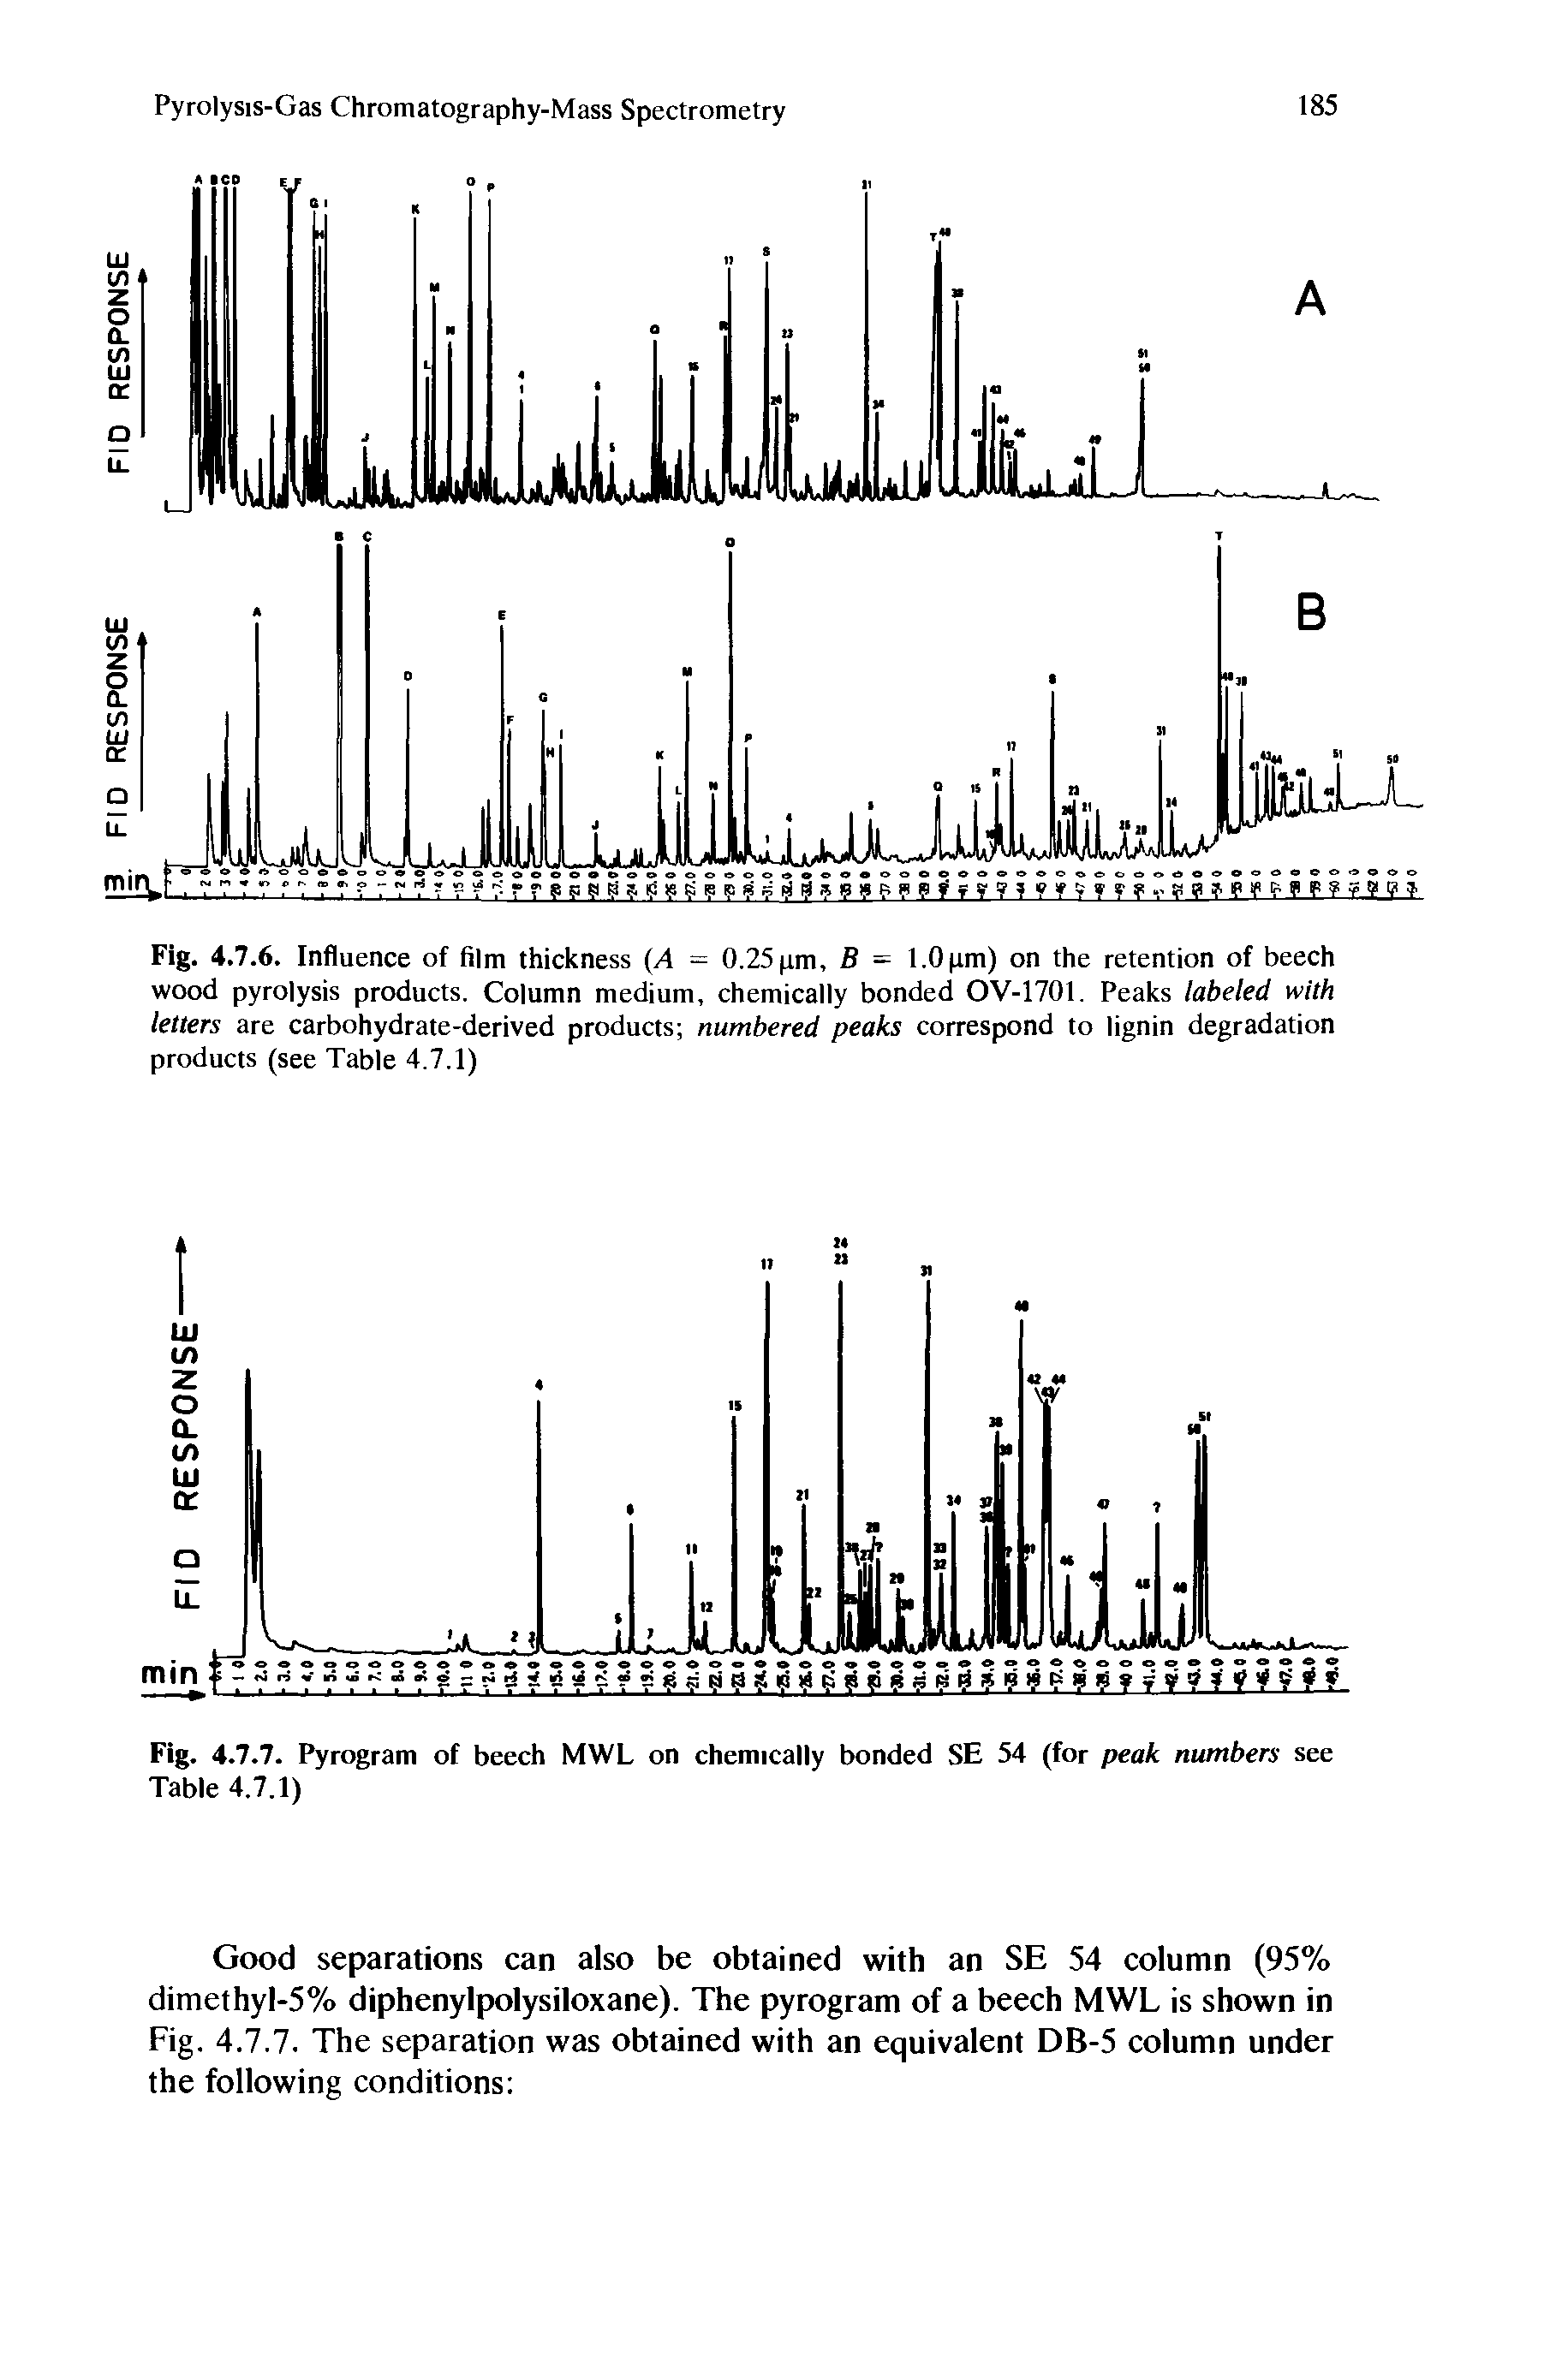 Fig. 4.7.6. Influence of film thickness (A = 0.25 pm, B - 1.0 pm) on the retention of beech wood pyrolysis products. Column medium, chemically bonded OV-1701. Peaks labeled with letters are carbohydrate-derived products numbered peaks correspond to lignin degradation products (see Table 4.7.1)...